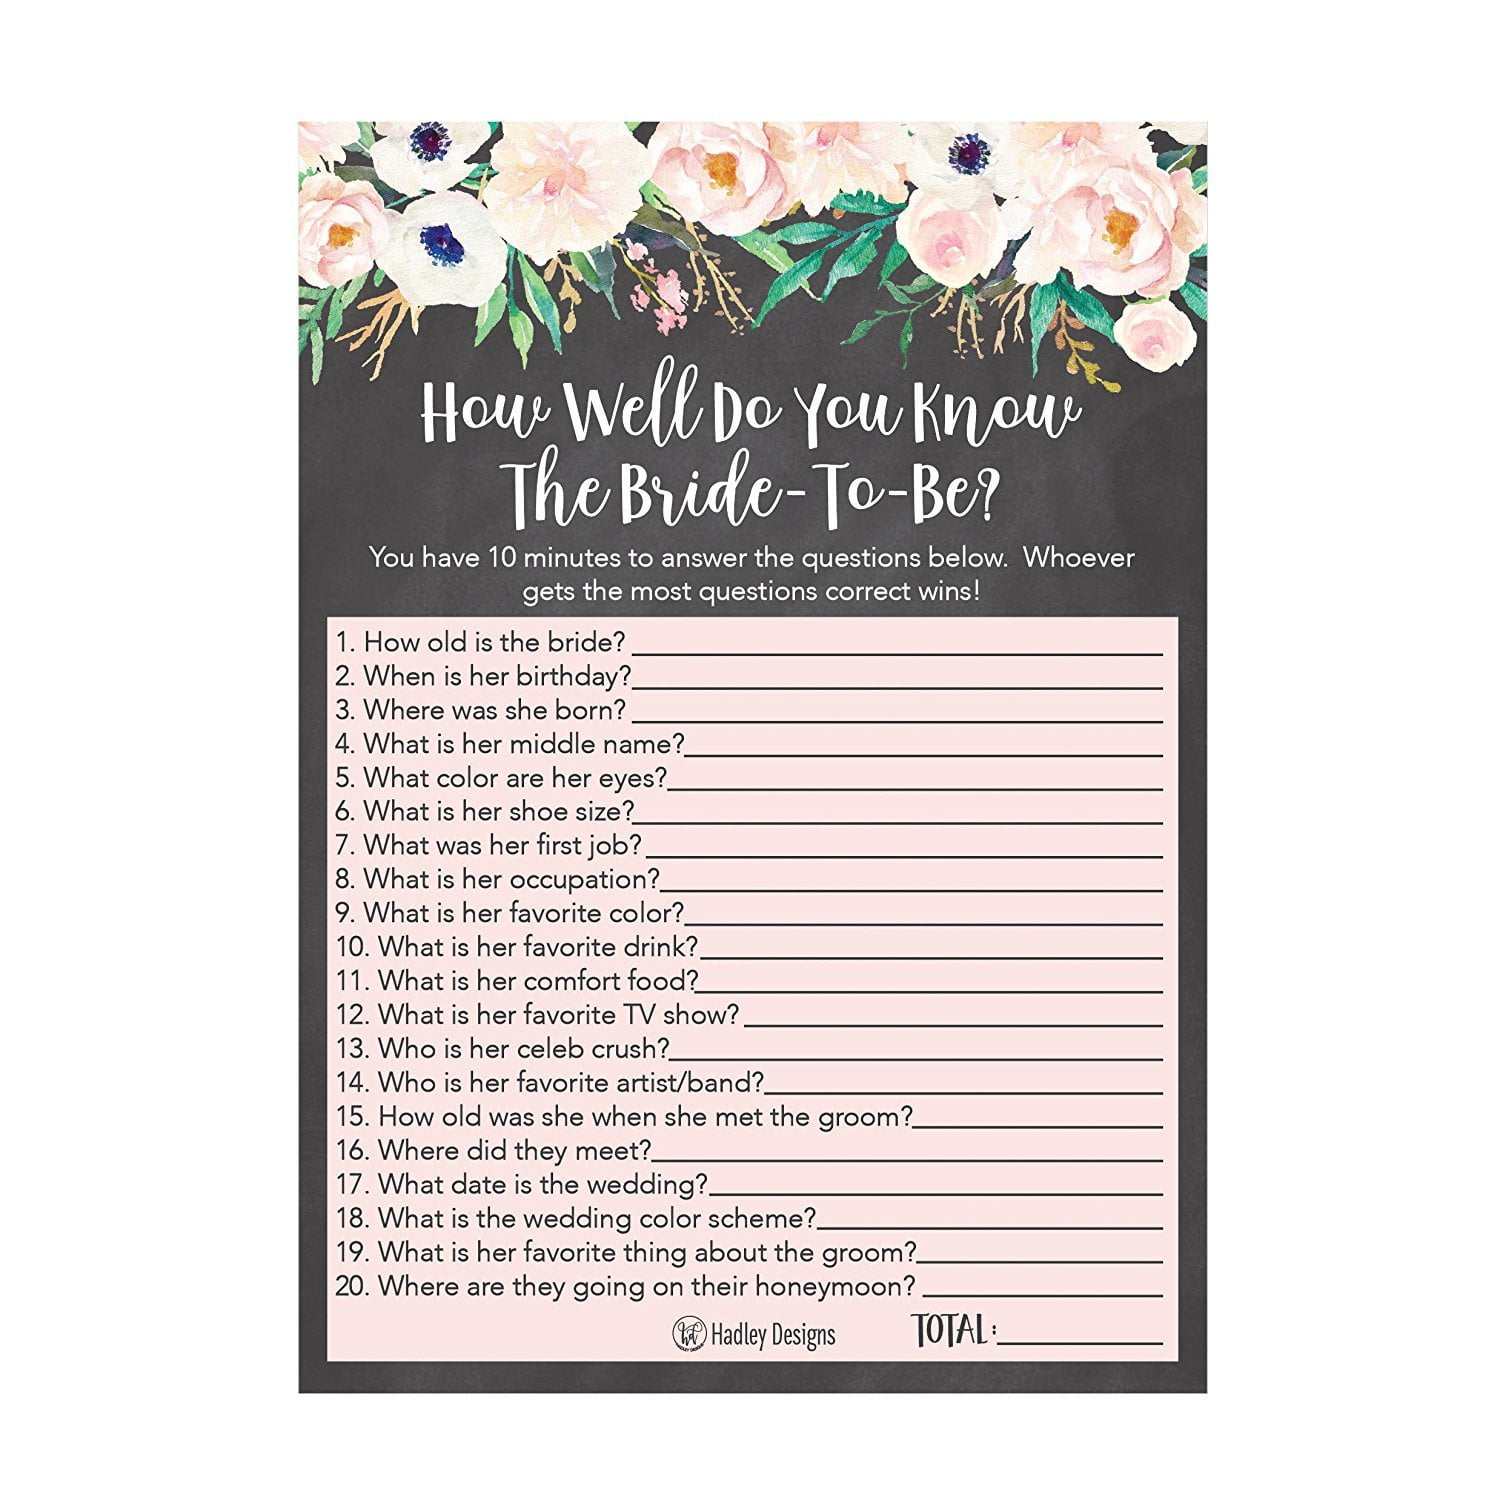 How Well Do You Know The Bride About the Bride Would She Rather Bridal Shower Game Who Knows the Bride Best Who Knows the Bride Best?